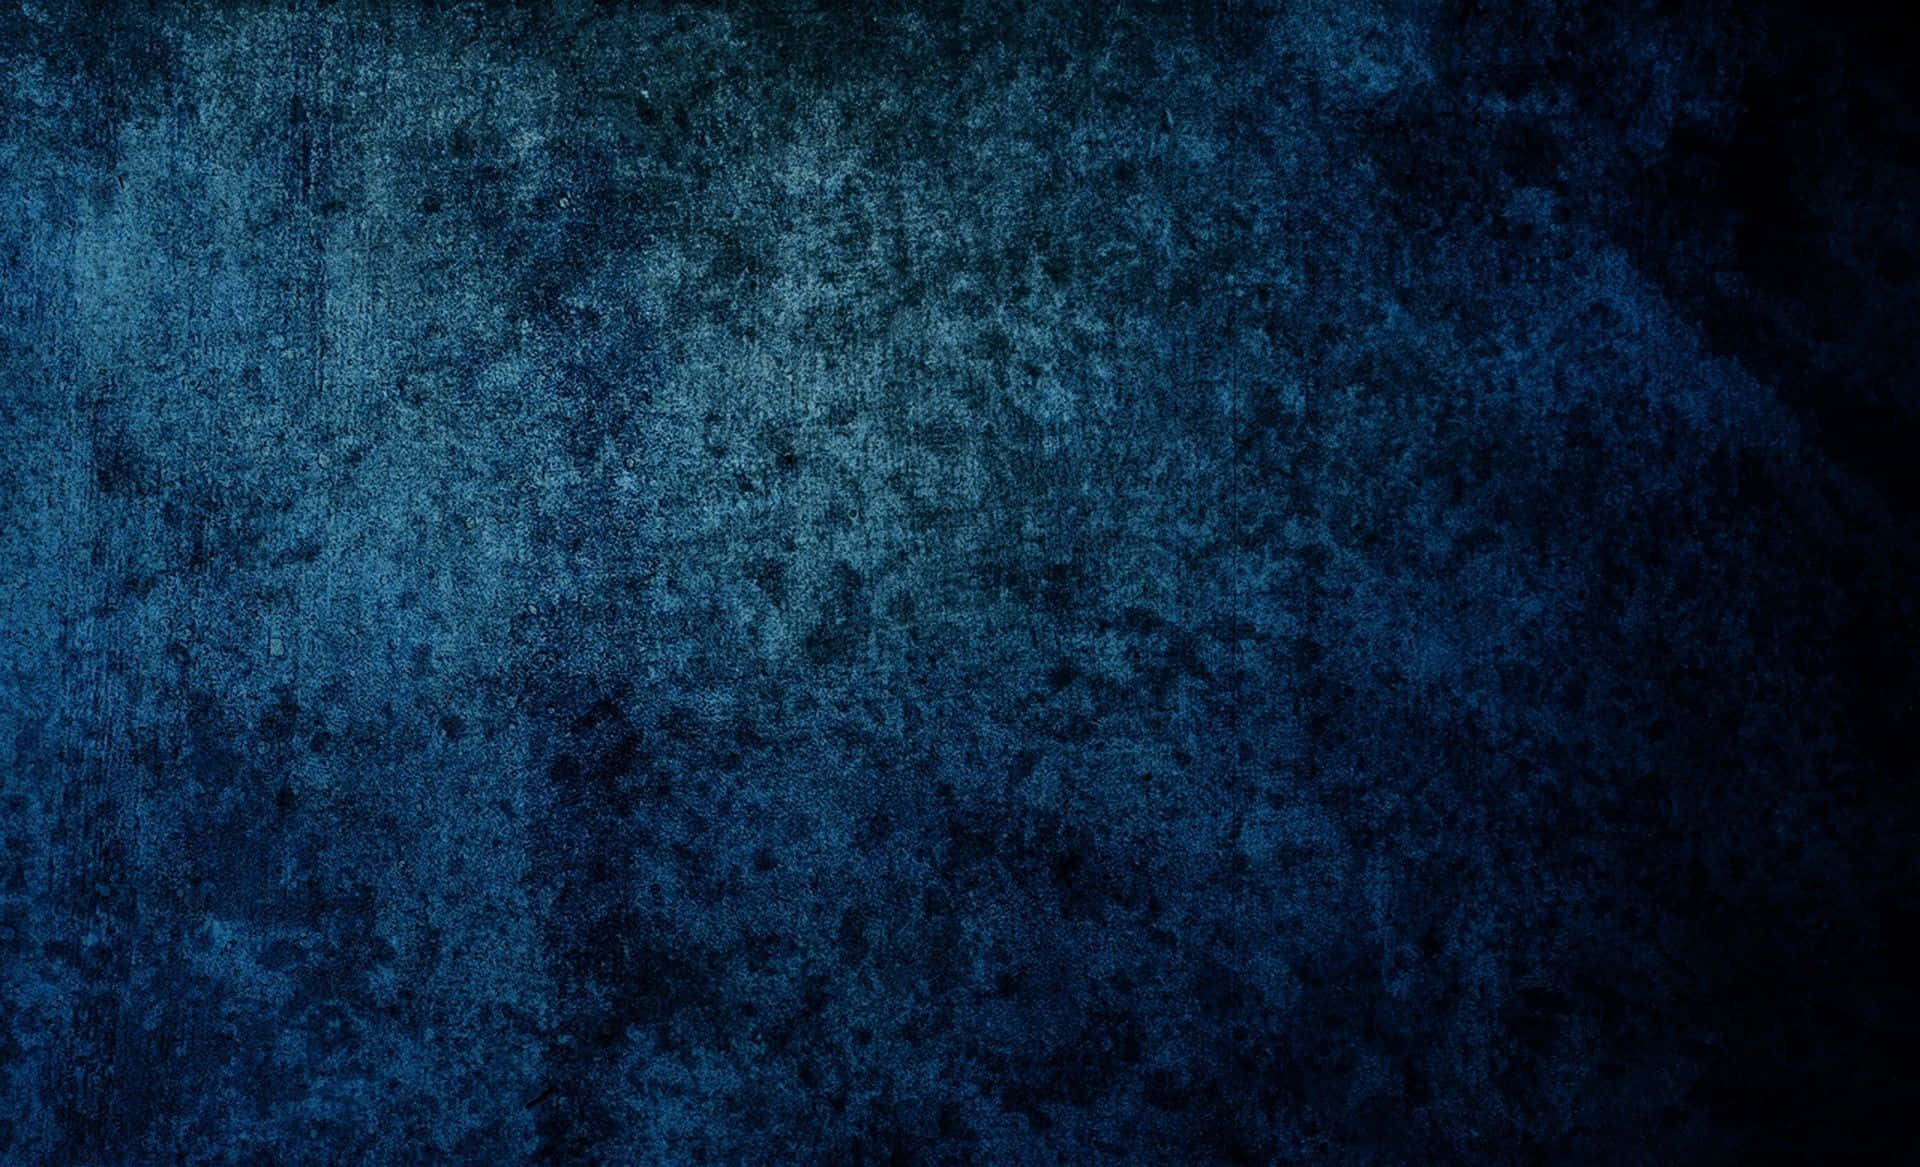 A vibrant grey and blue background